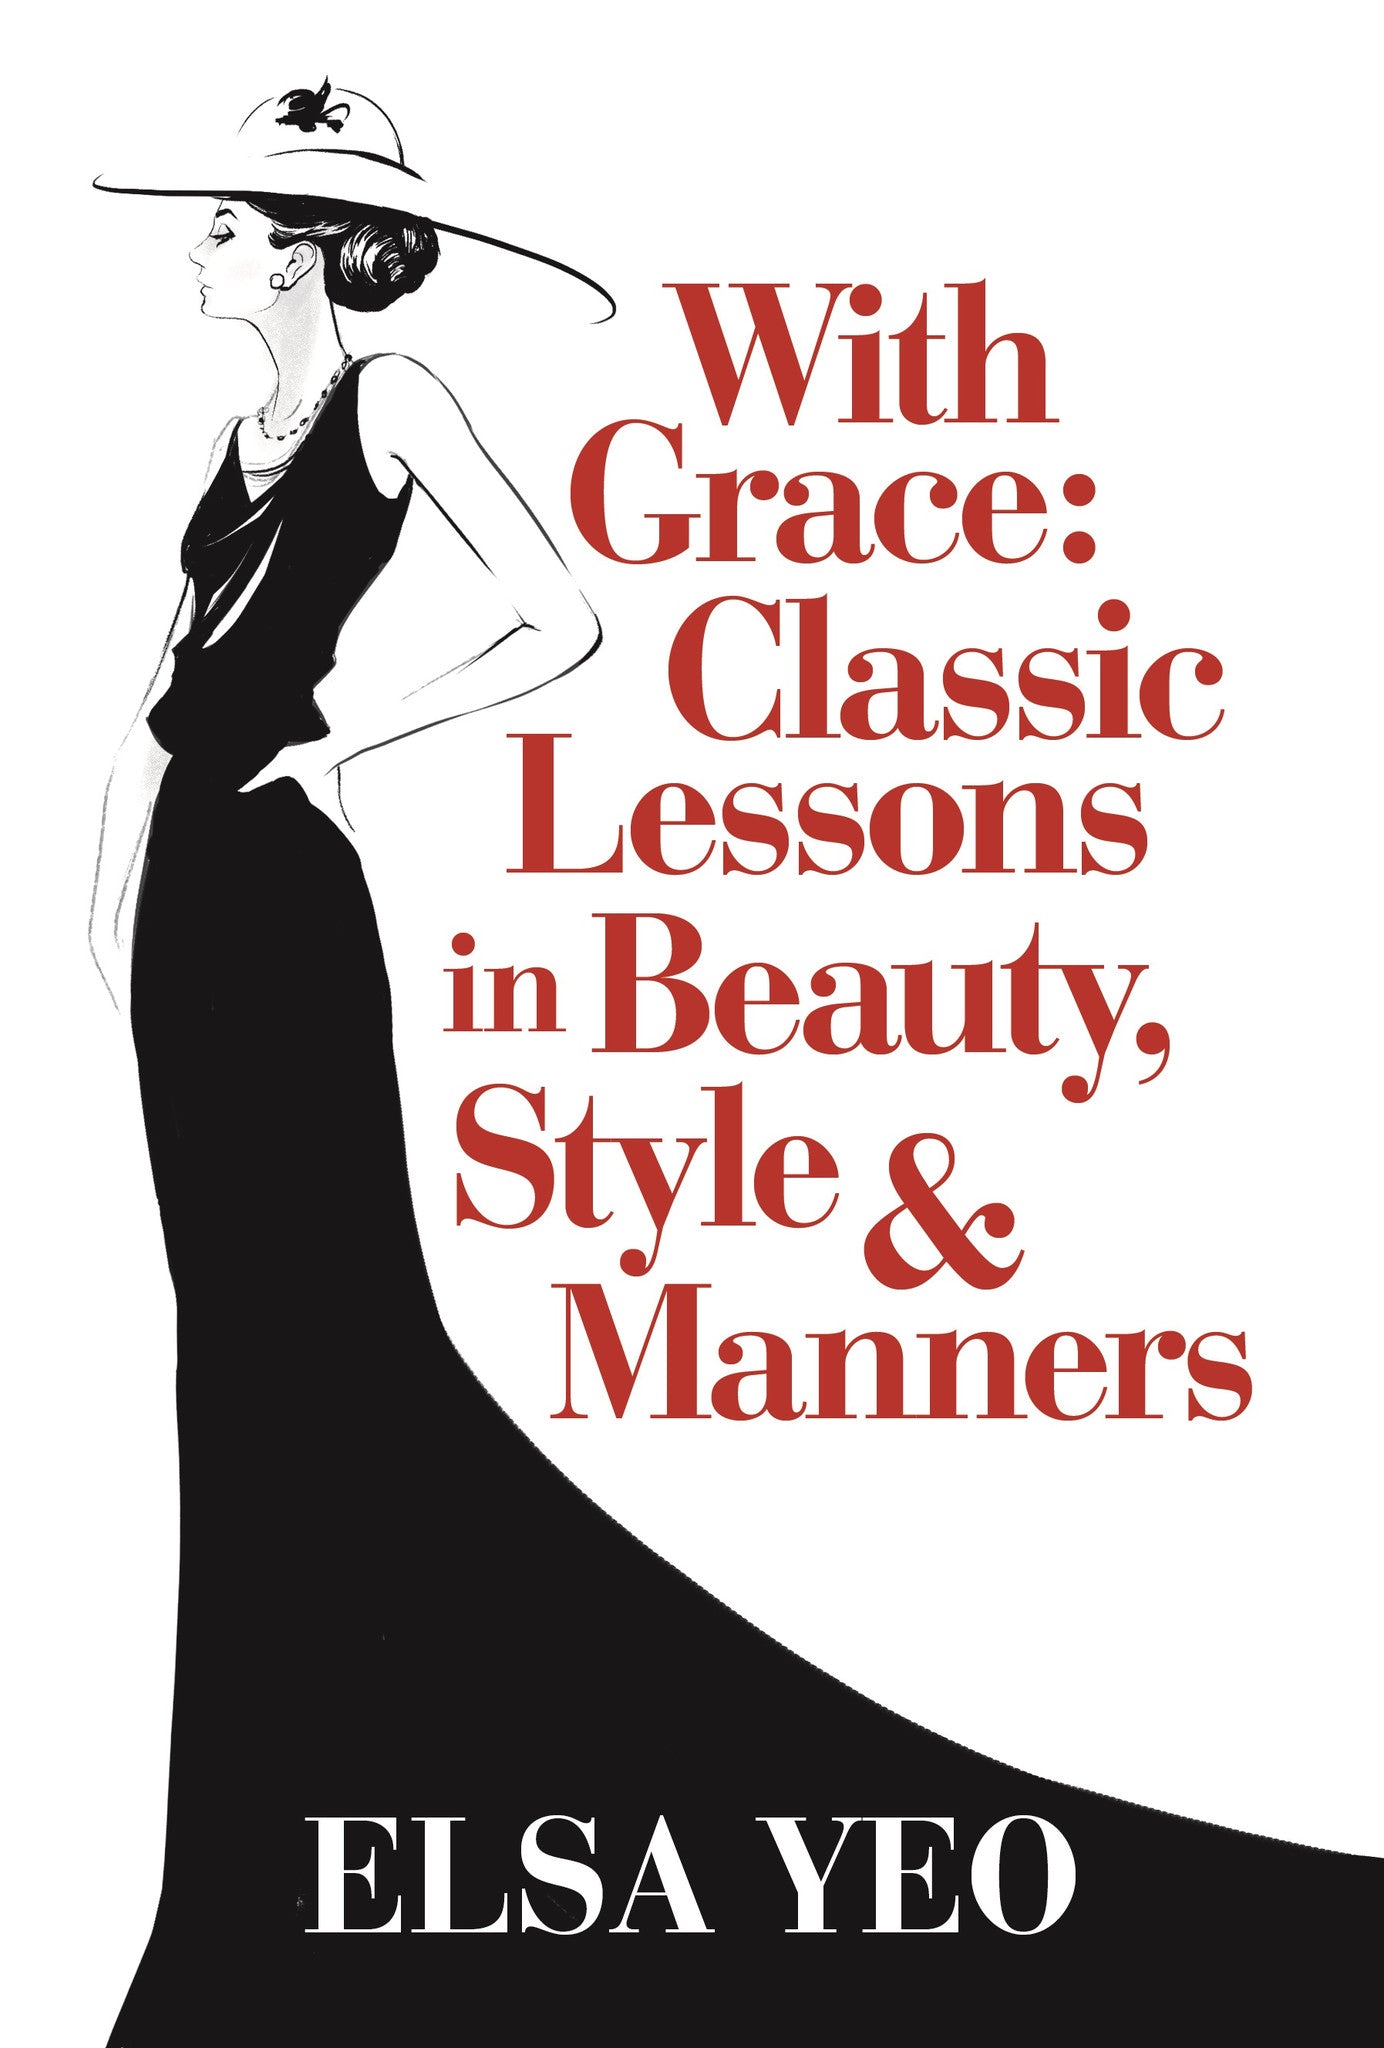 With Grace: Classic Lessons on Beauty, Style & Manners